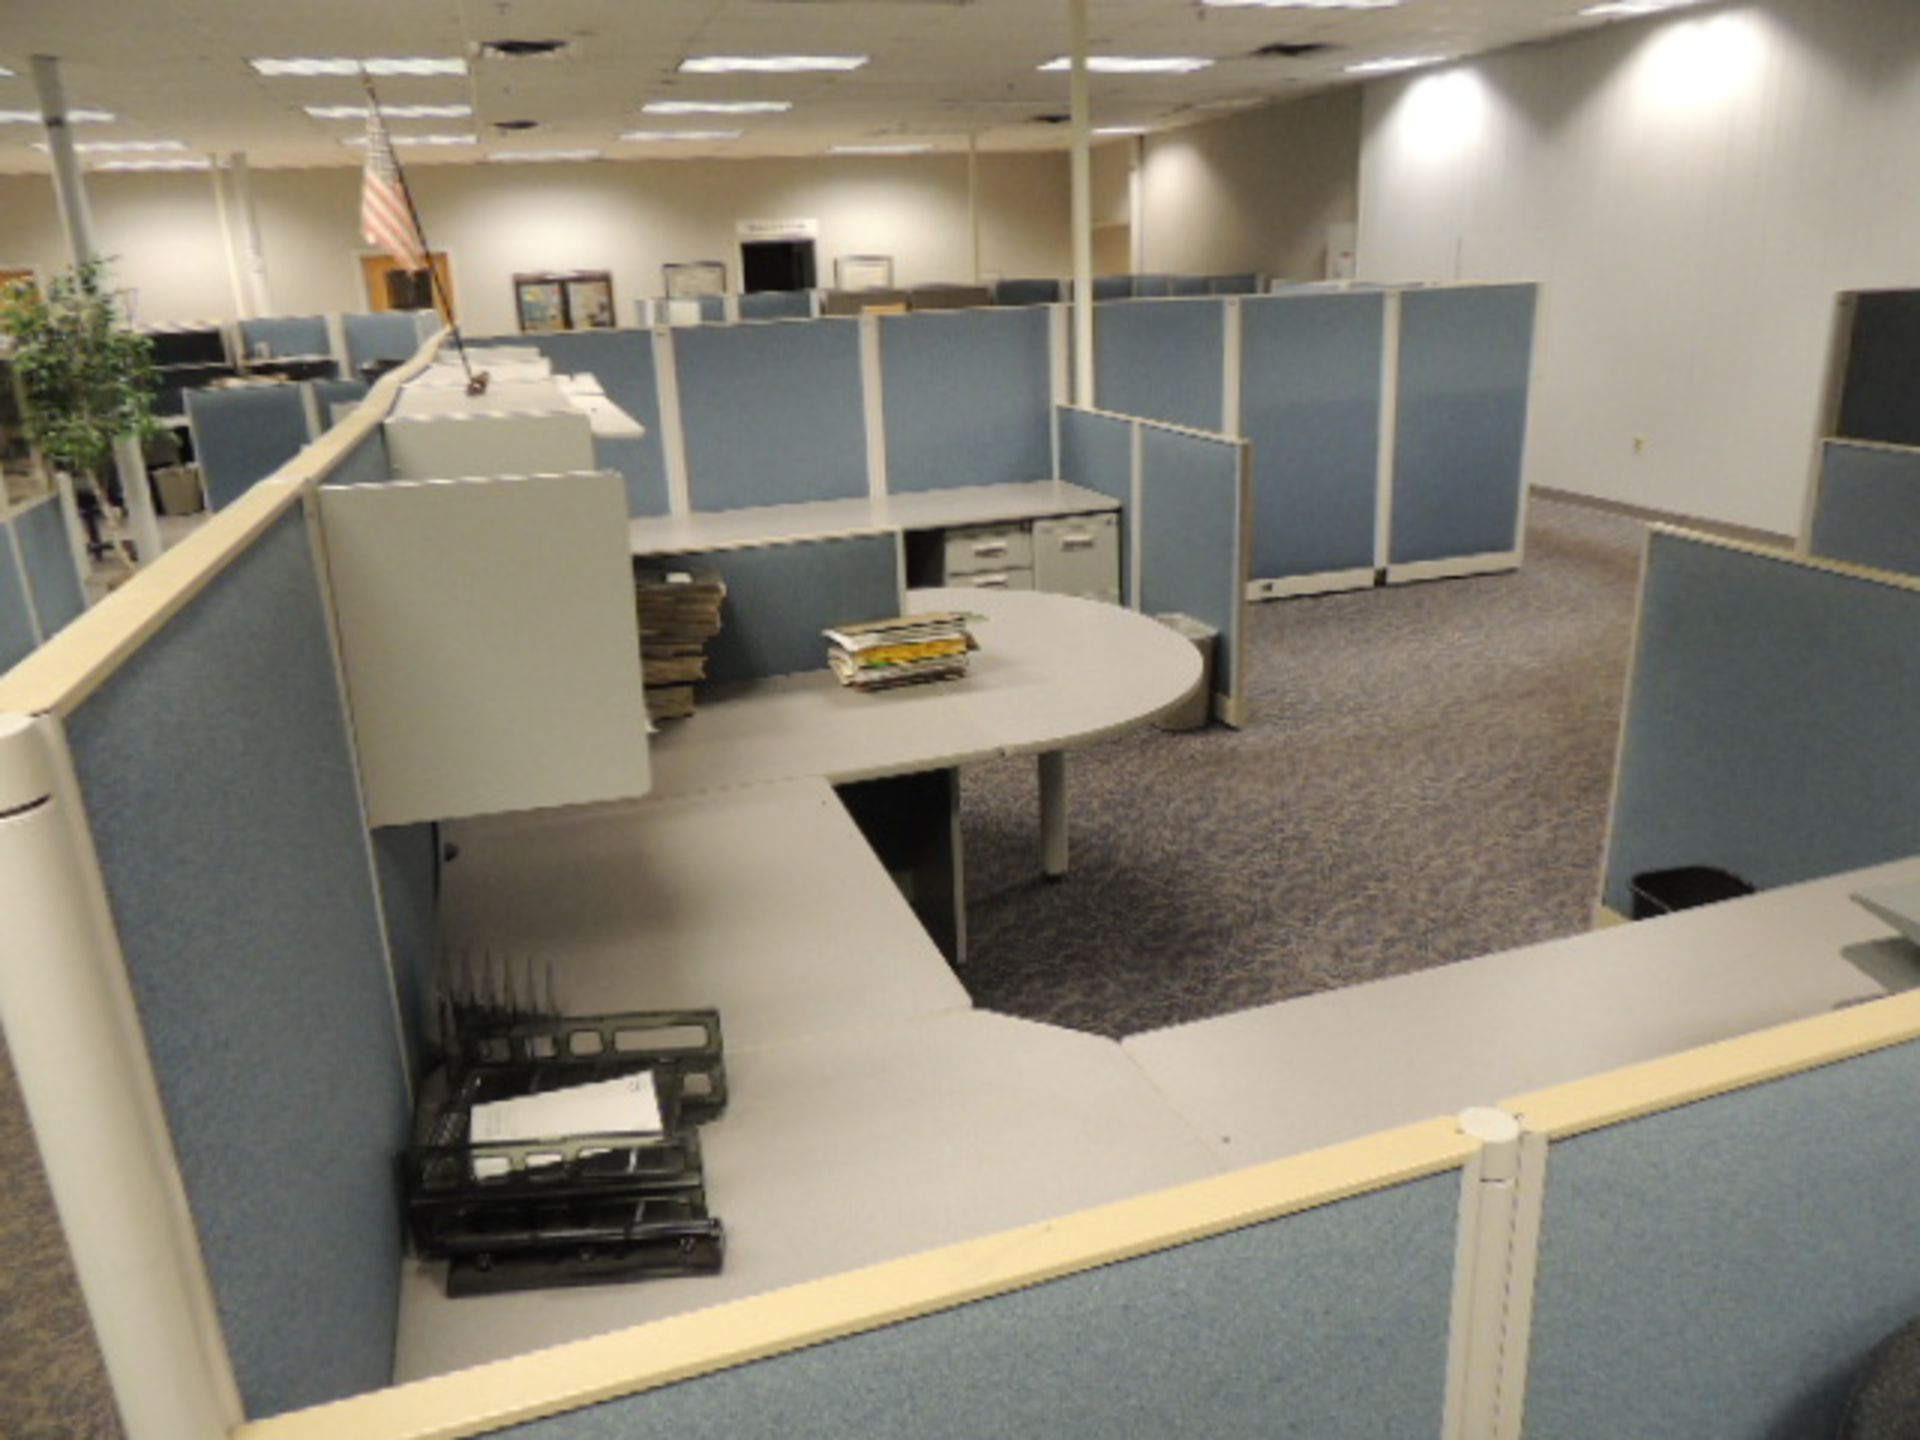 Office Cubicles & Contents. Lot: (3) offices and contents, (4) cubicles 10'x15'x8' with desks and - Image 22 of 25